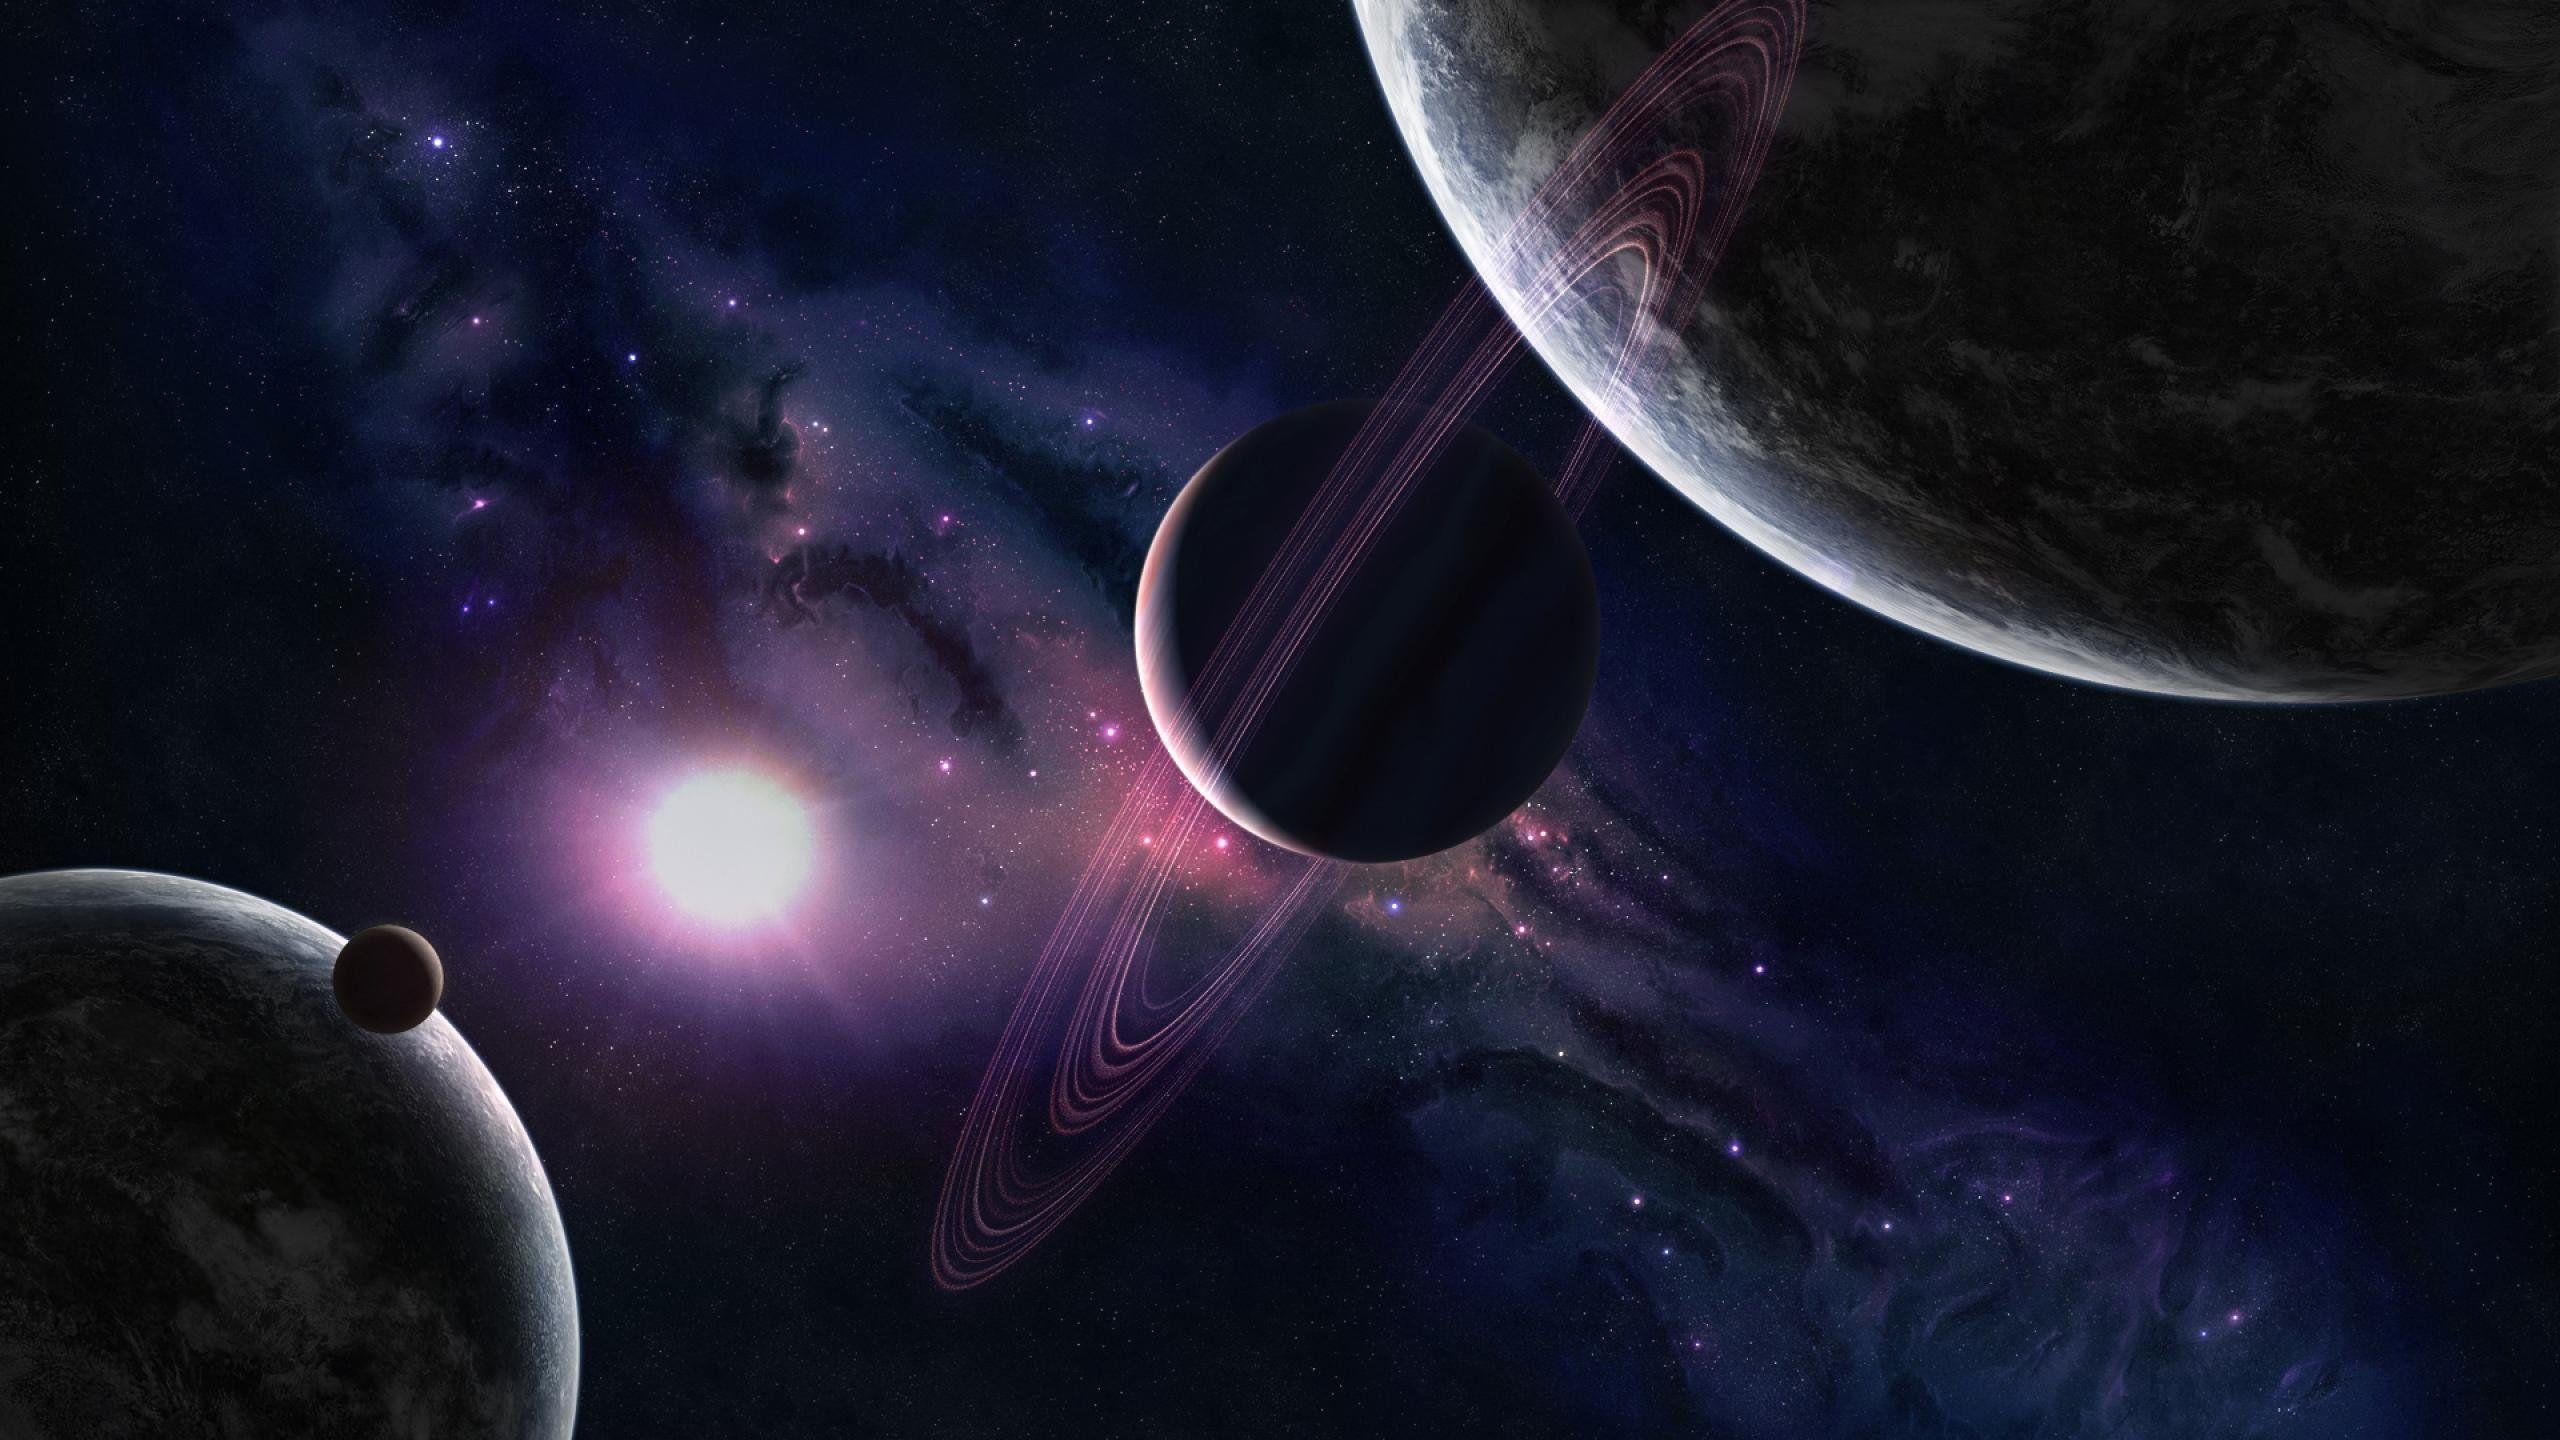 Solar System D Wallpaper Pro Android Apps on Google Play 1920×1080